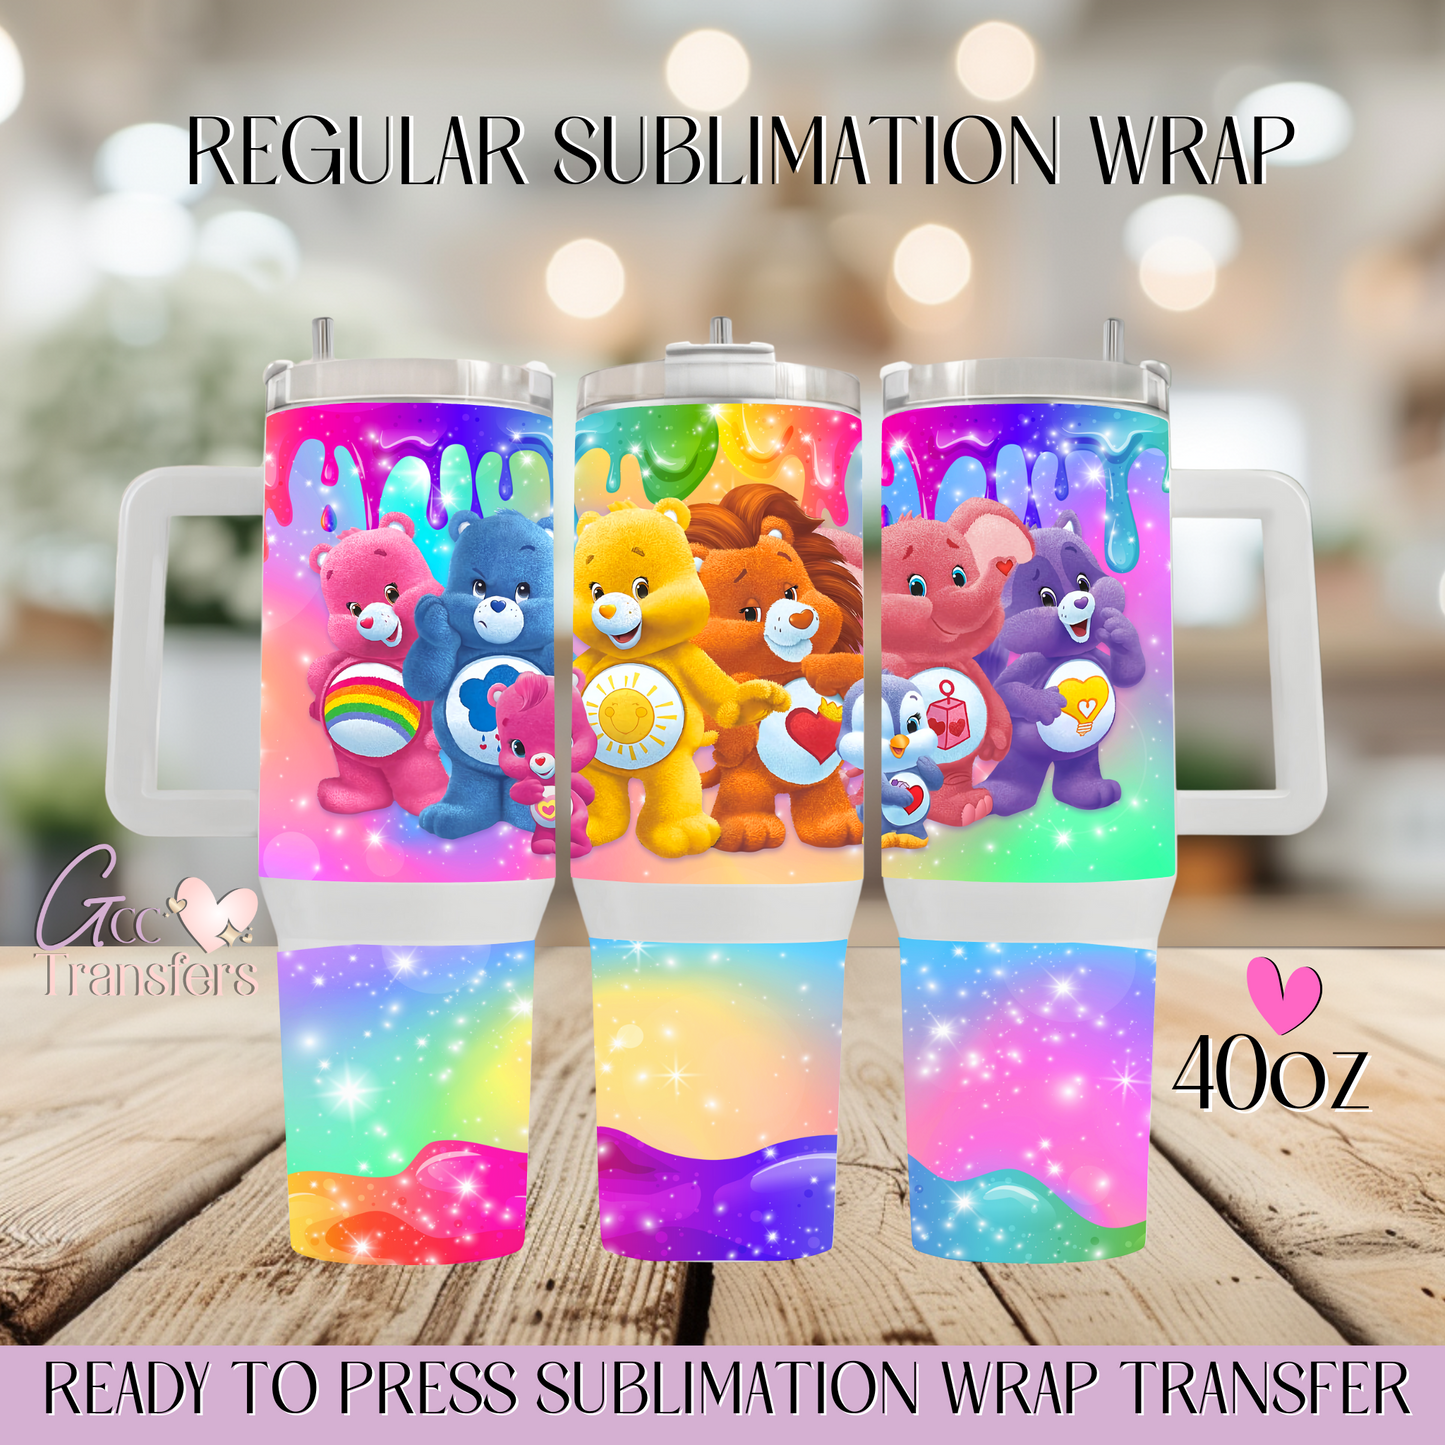 Care Bears Dripping - 40oz Regular Sublimation Wrap